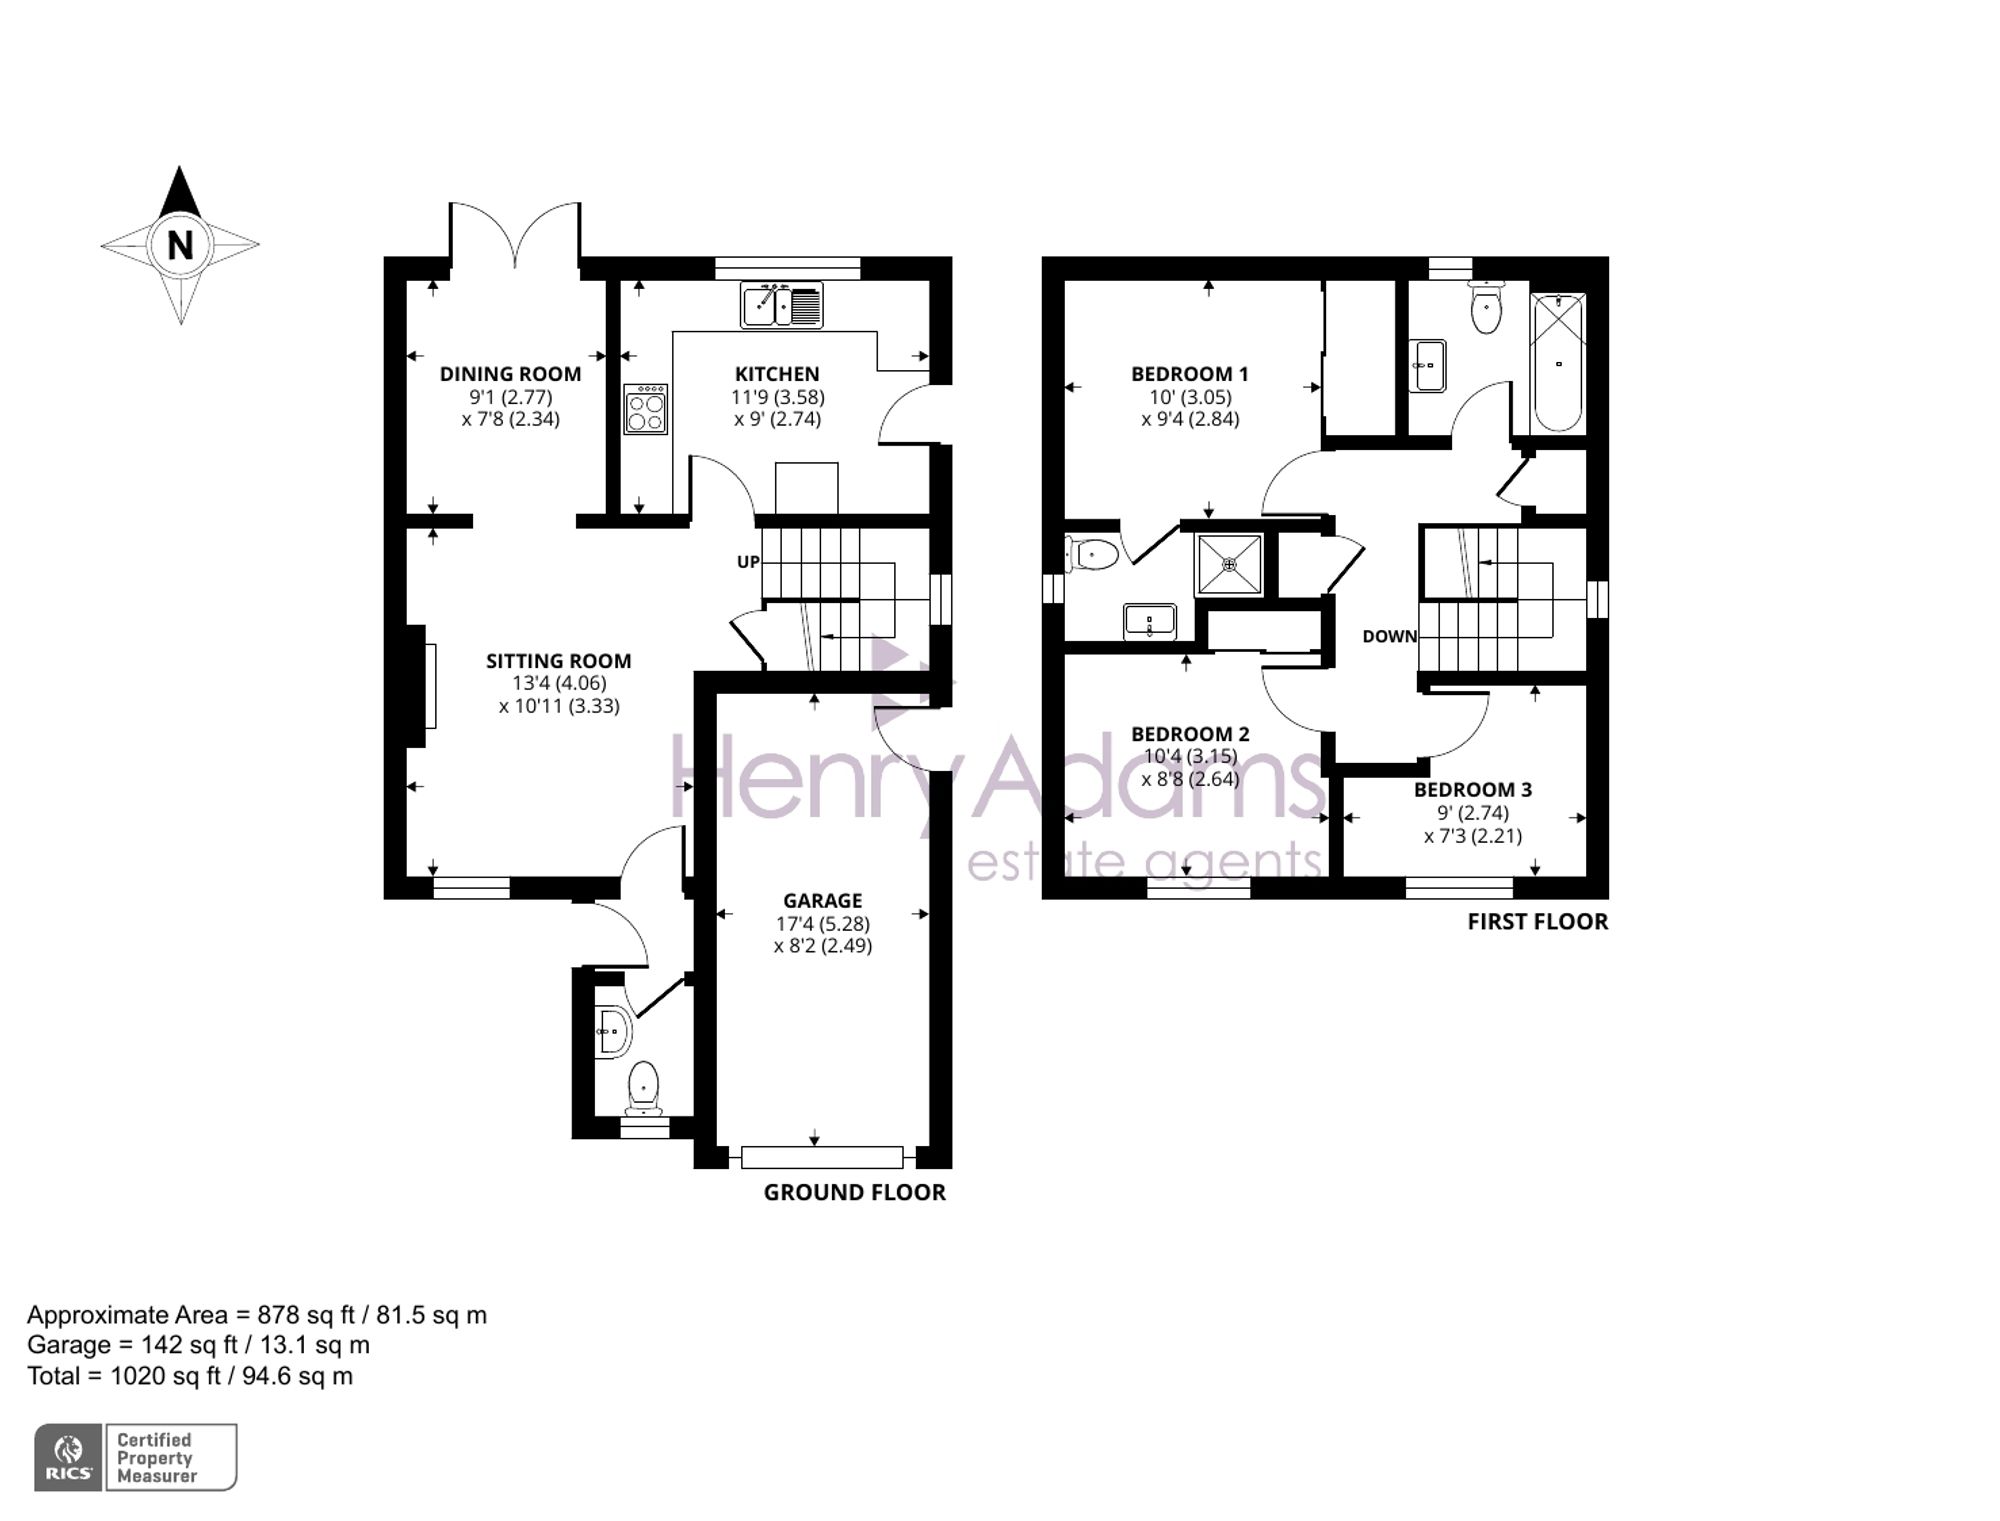 Chaucer Drive, West Wittering, PO20 floorplans